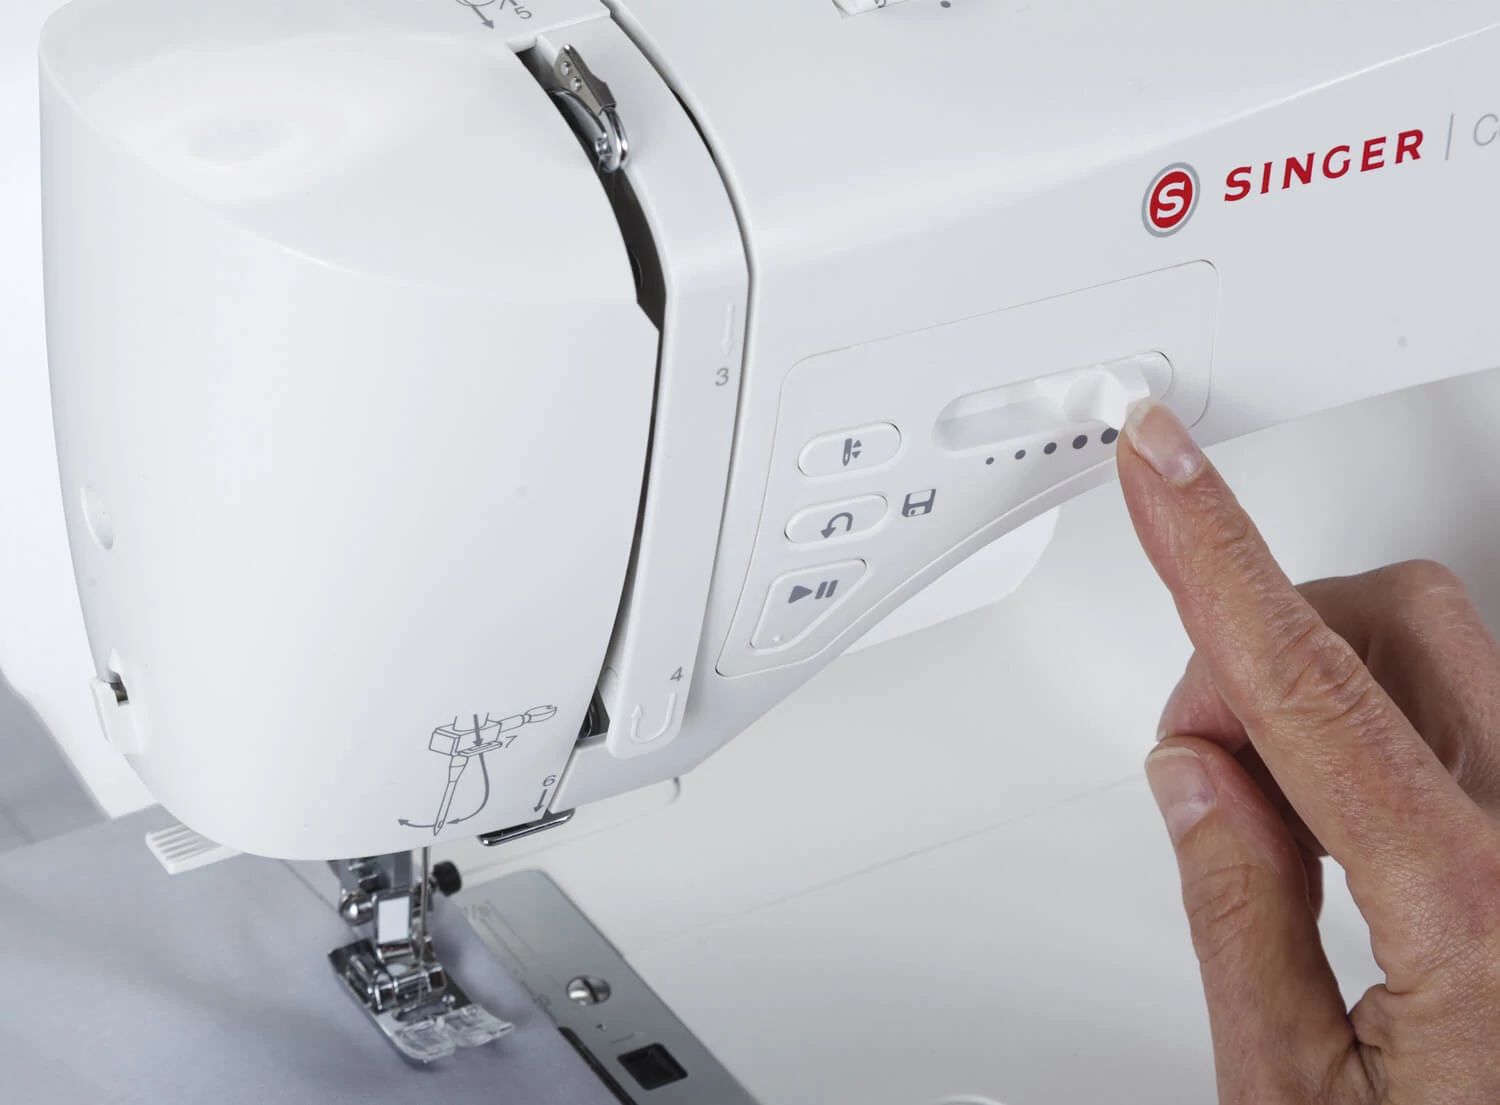 Confidence™ 7640 Sewing Machine